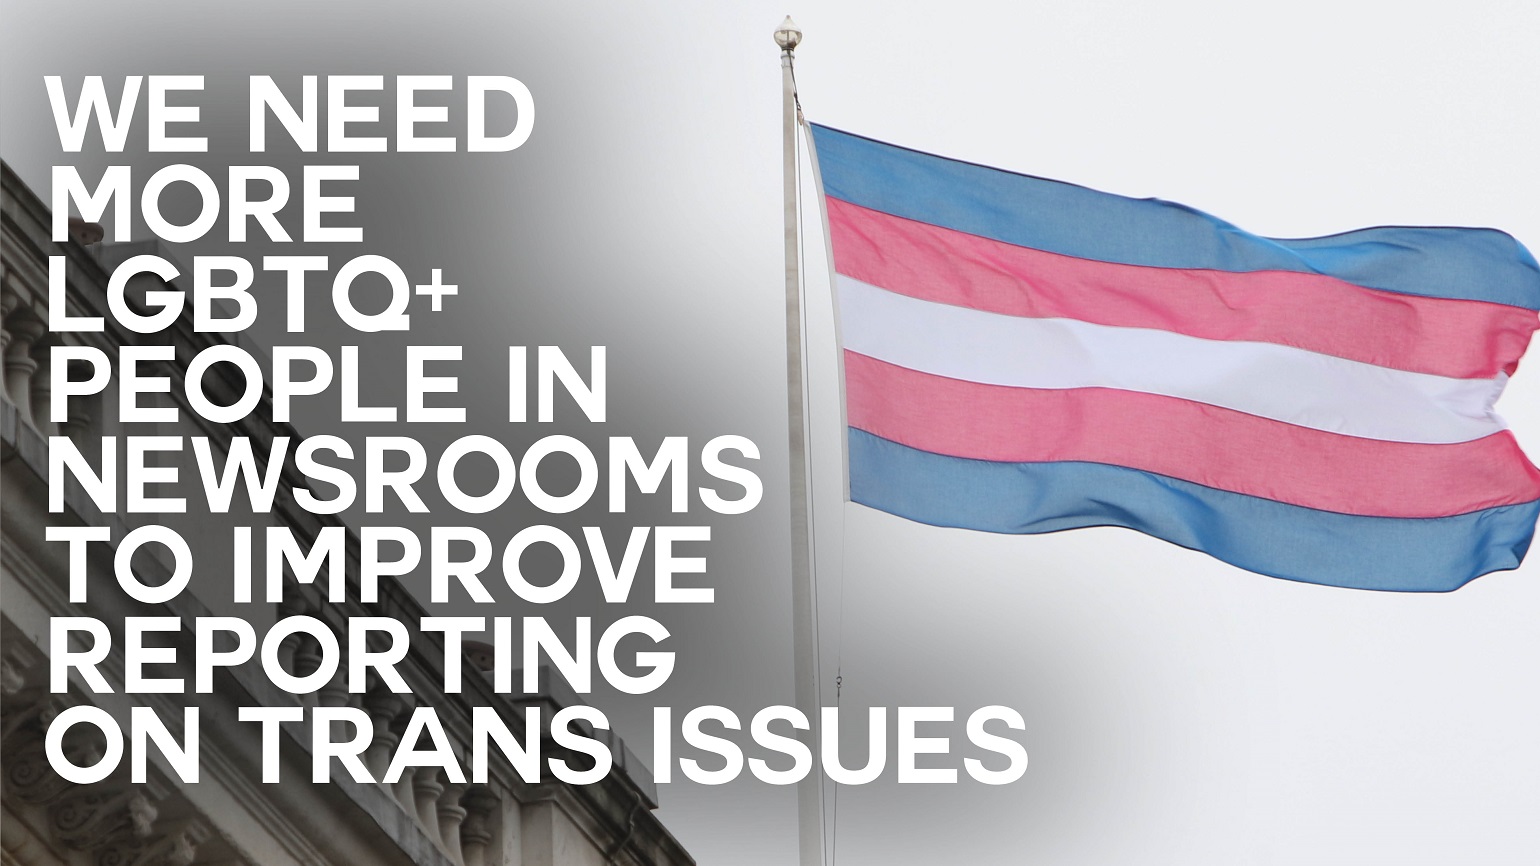 A photo of a trans pride flag with text reading "We need more LGBTQ+ people in newsrooms to improve reporting on trans issues